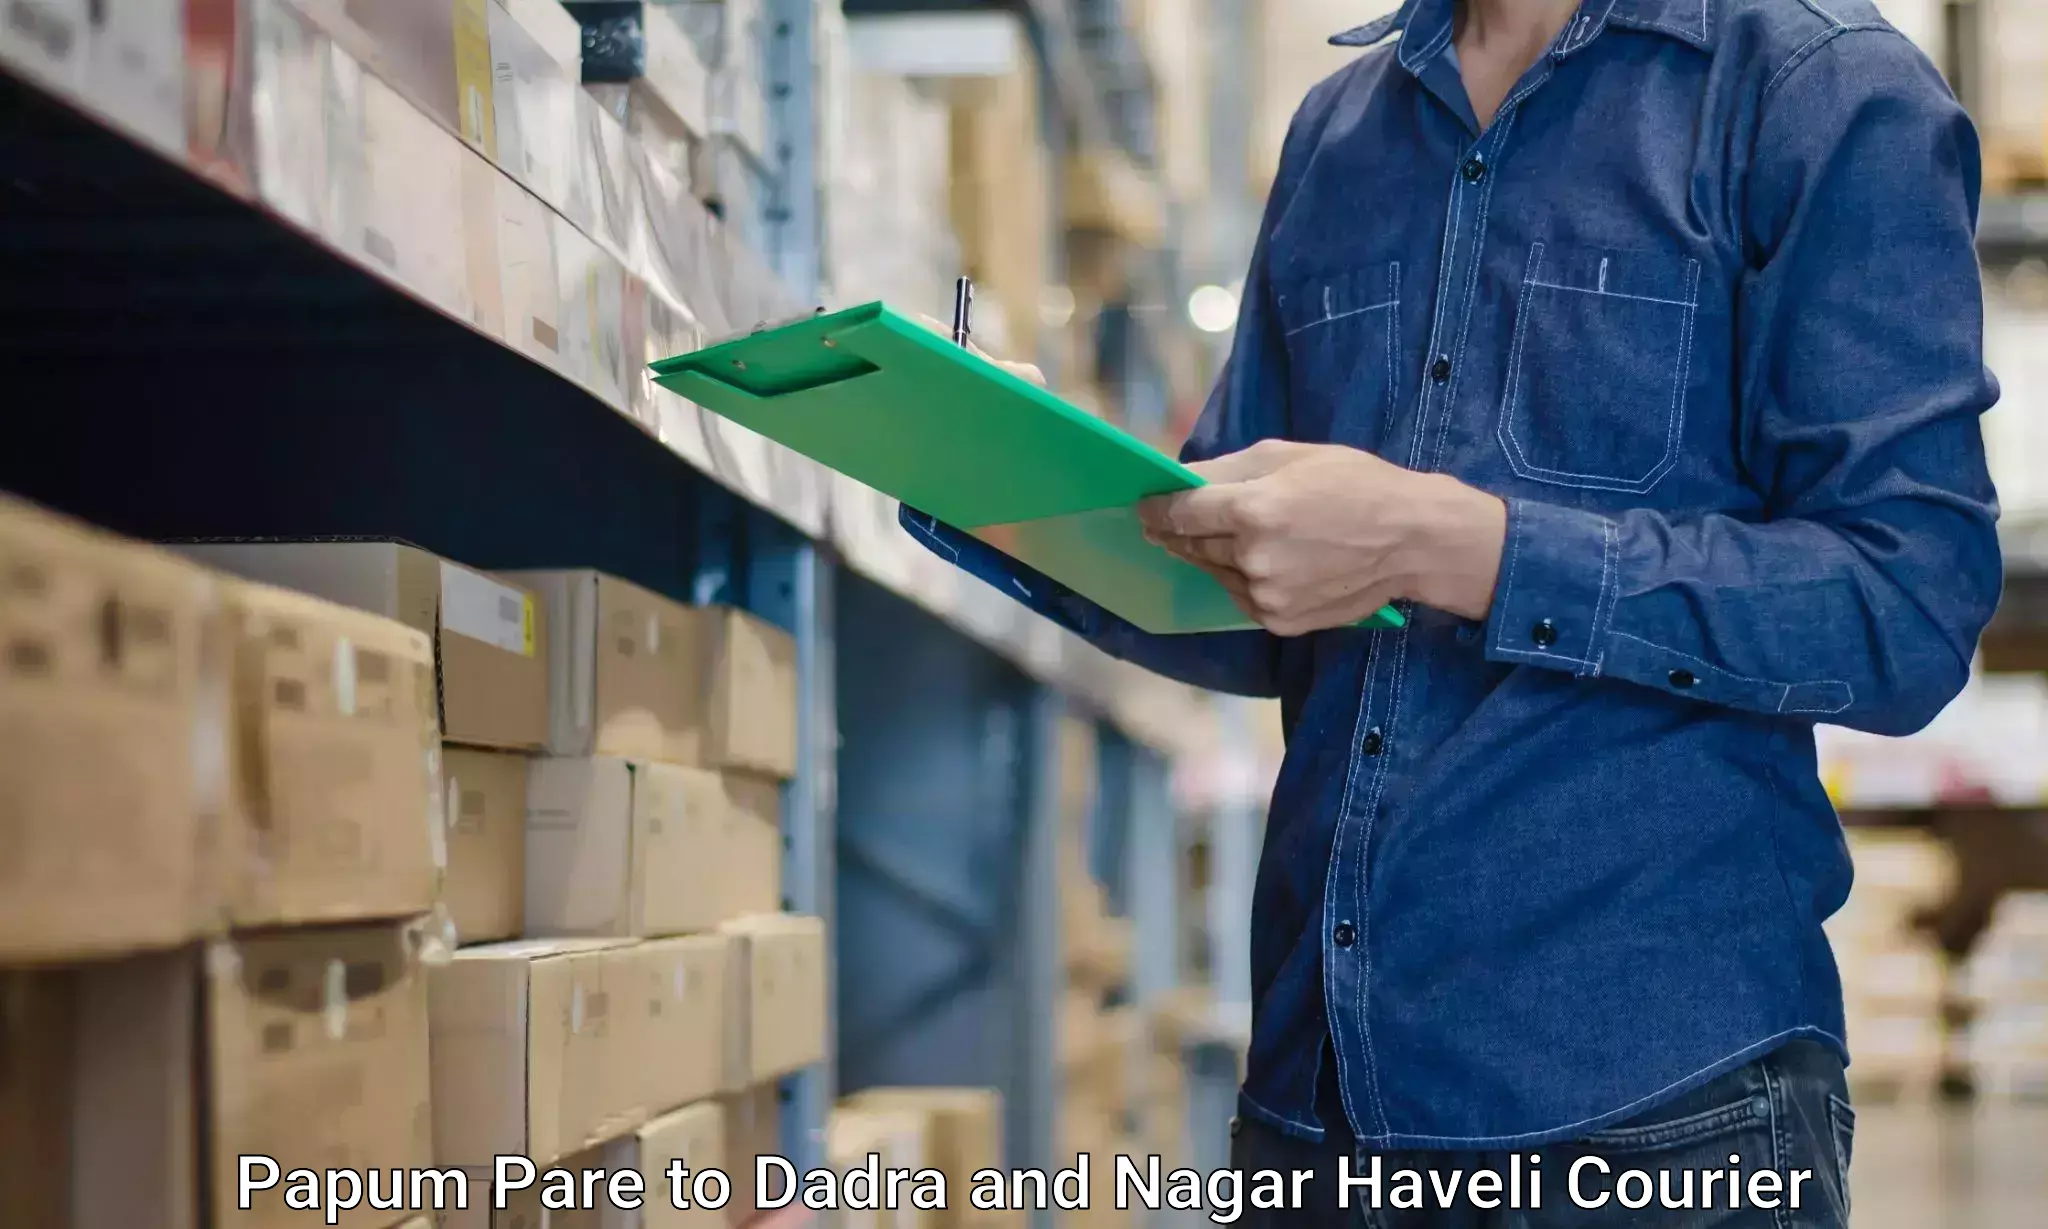 Hassle-free relocation Papum Pare to Dadra and Nagar Haveli